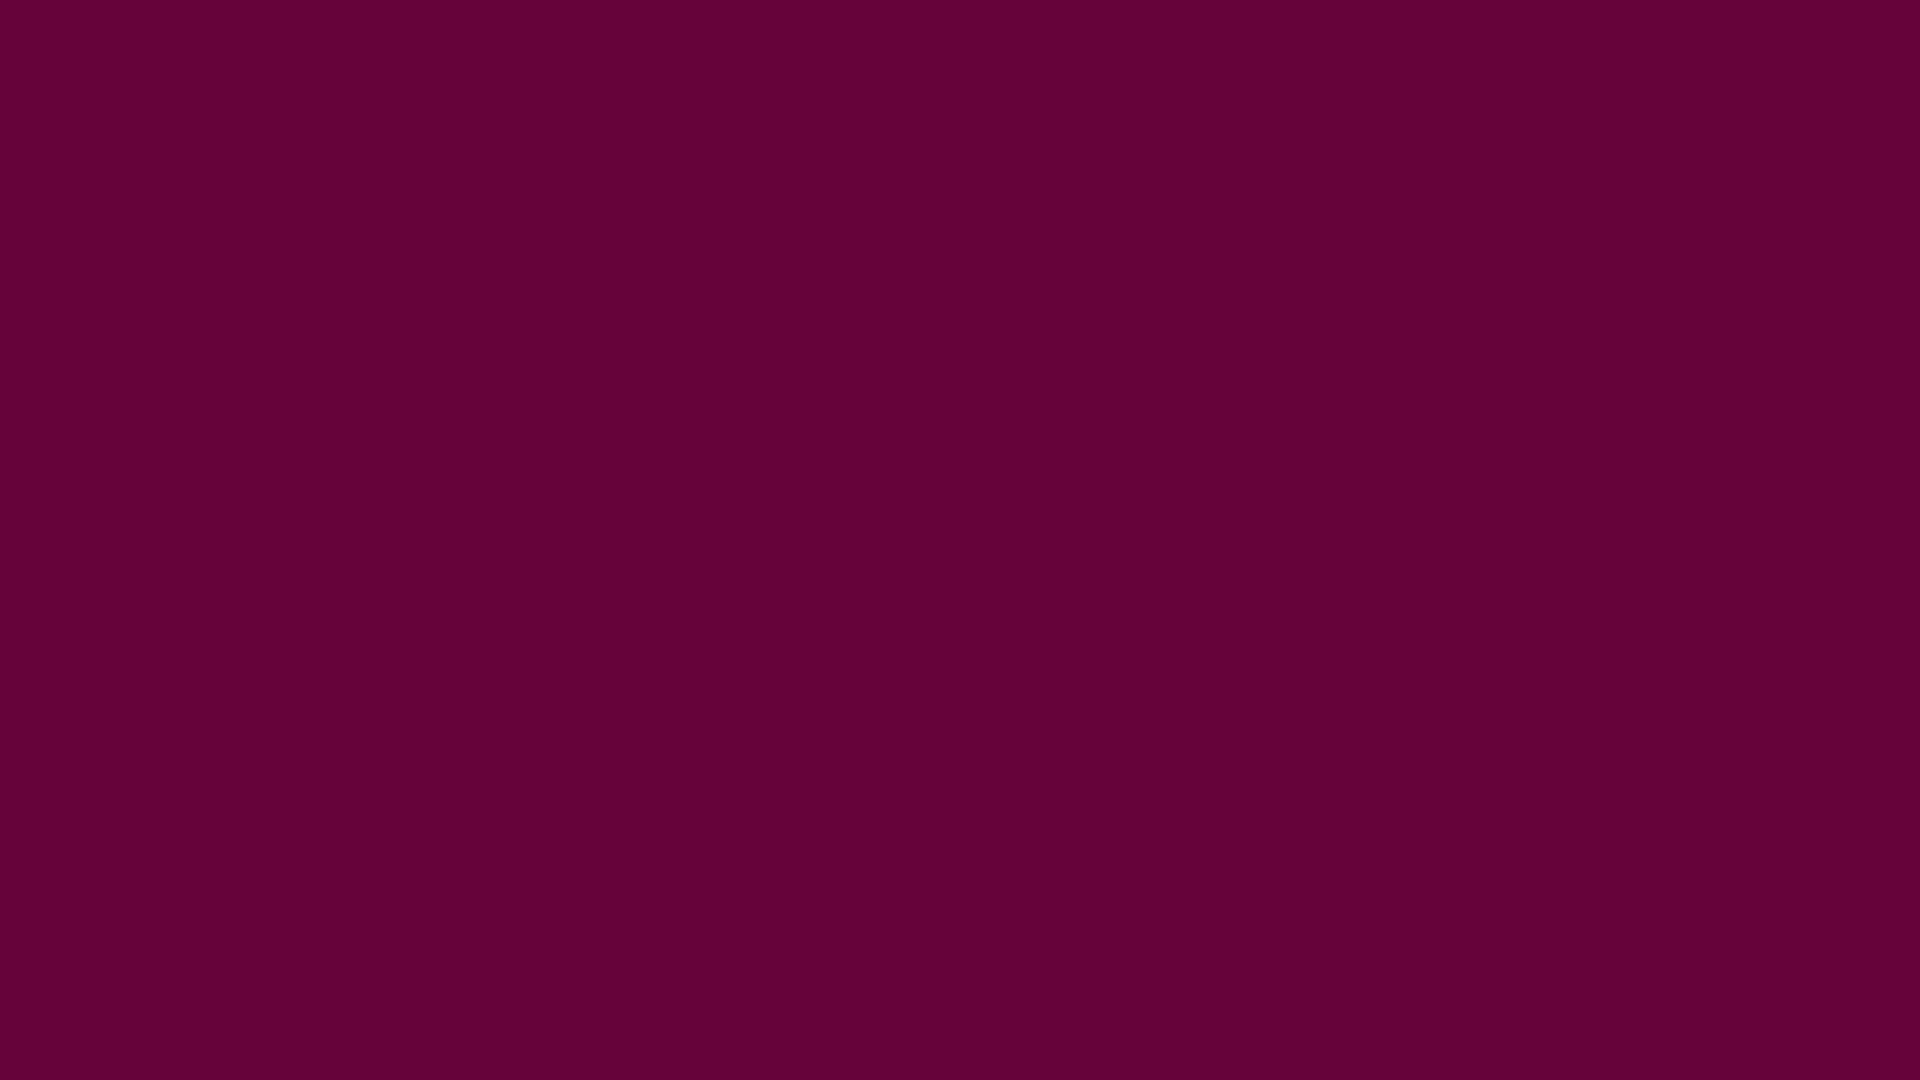 1920x1080-imperial-purple-solid-color-background.jpg